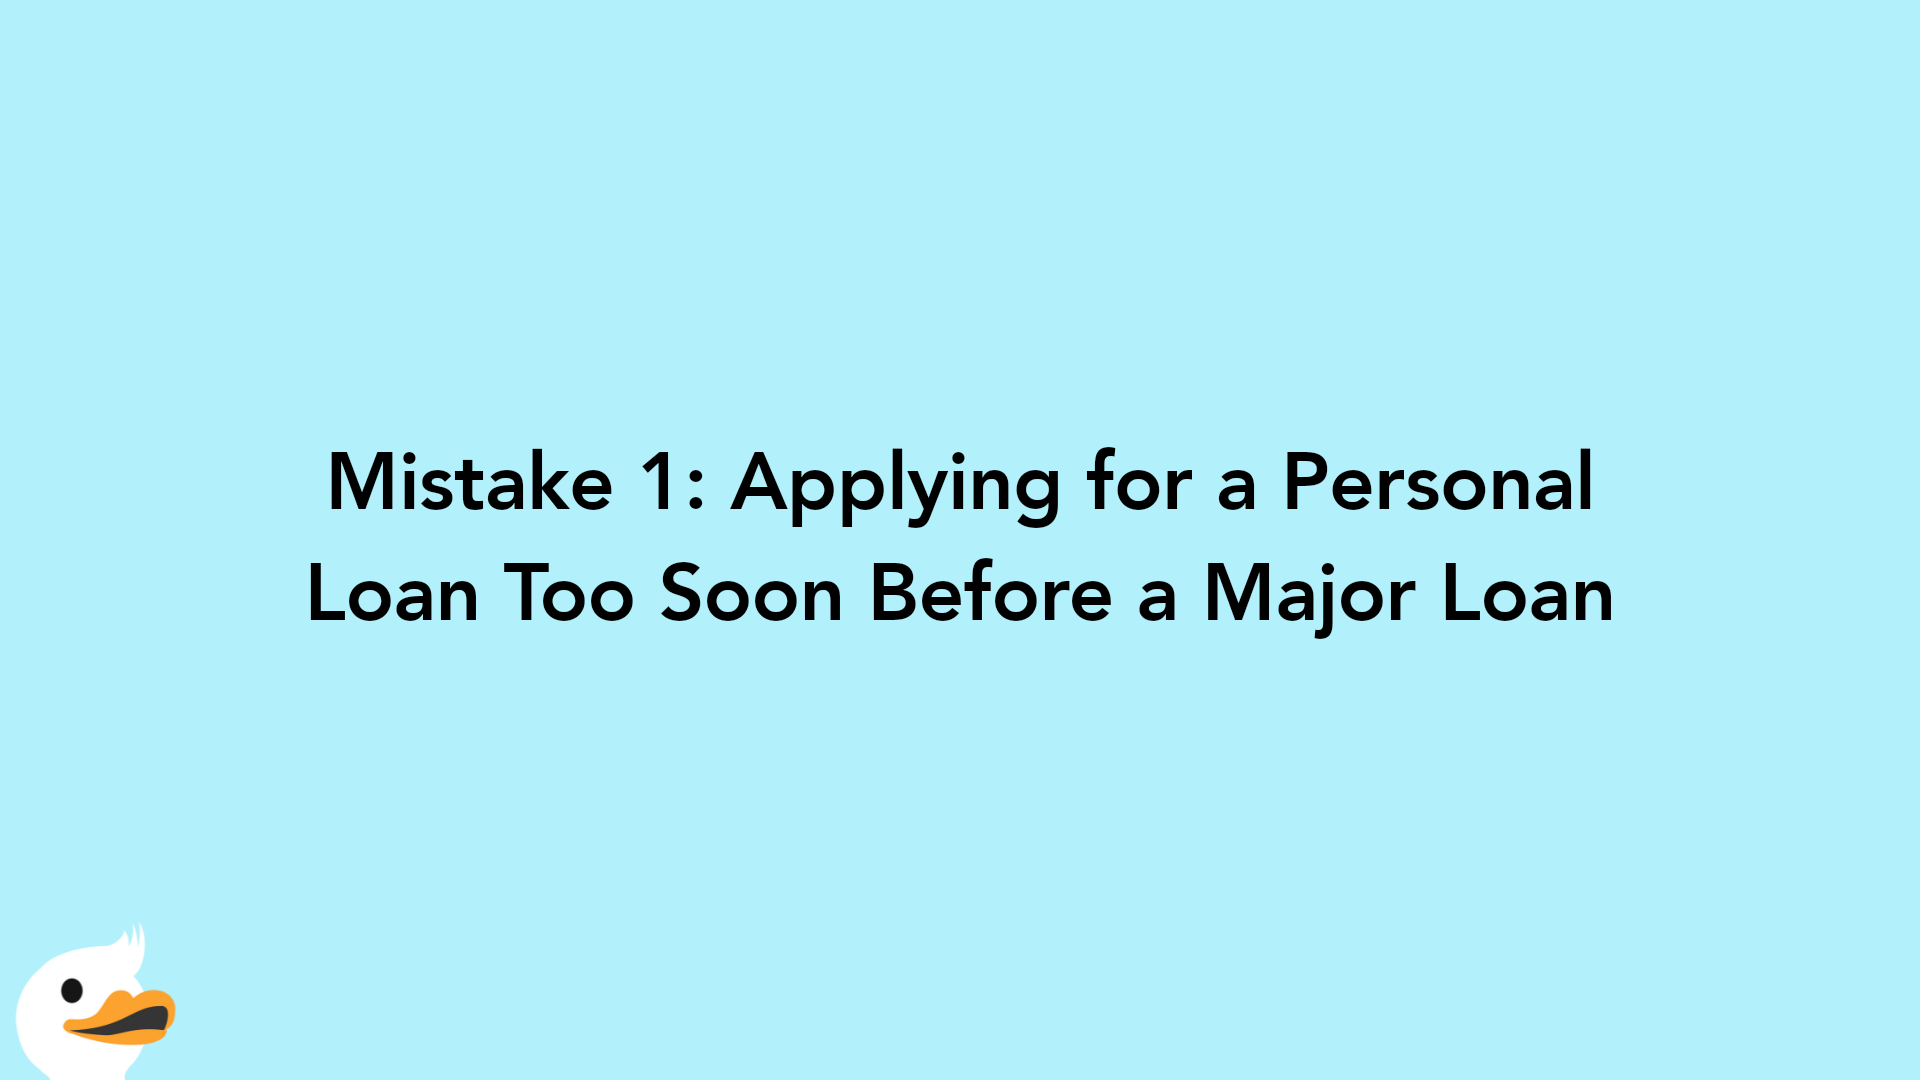 Mistake 1: Applying for a Personal Loan Too Soon Before a Major Loan